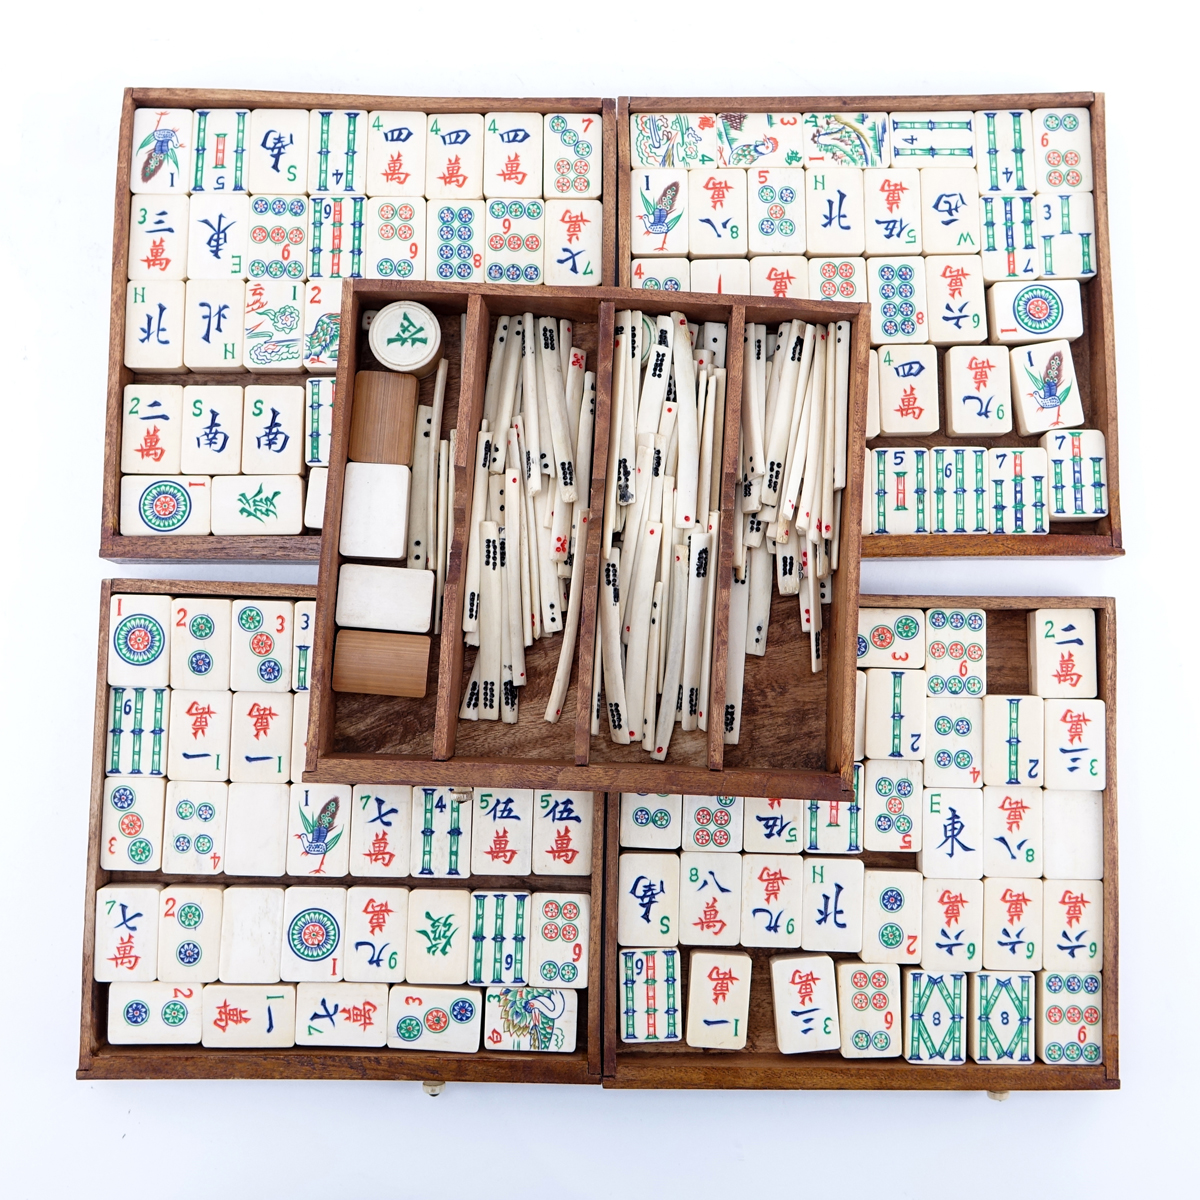 Vintage Mahjong Set, Carved Teak Box with Carved and Polychrome Bone and Bamboo Tiles. Appears to be compete.